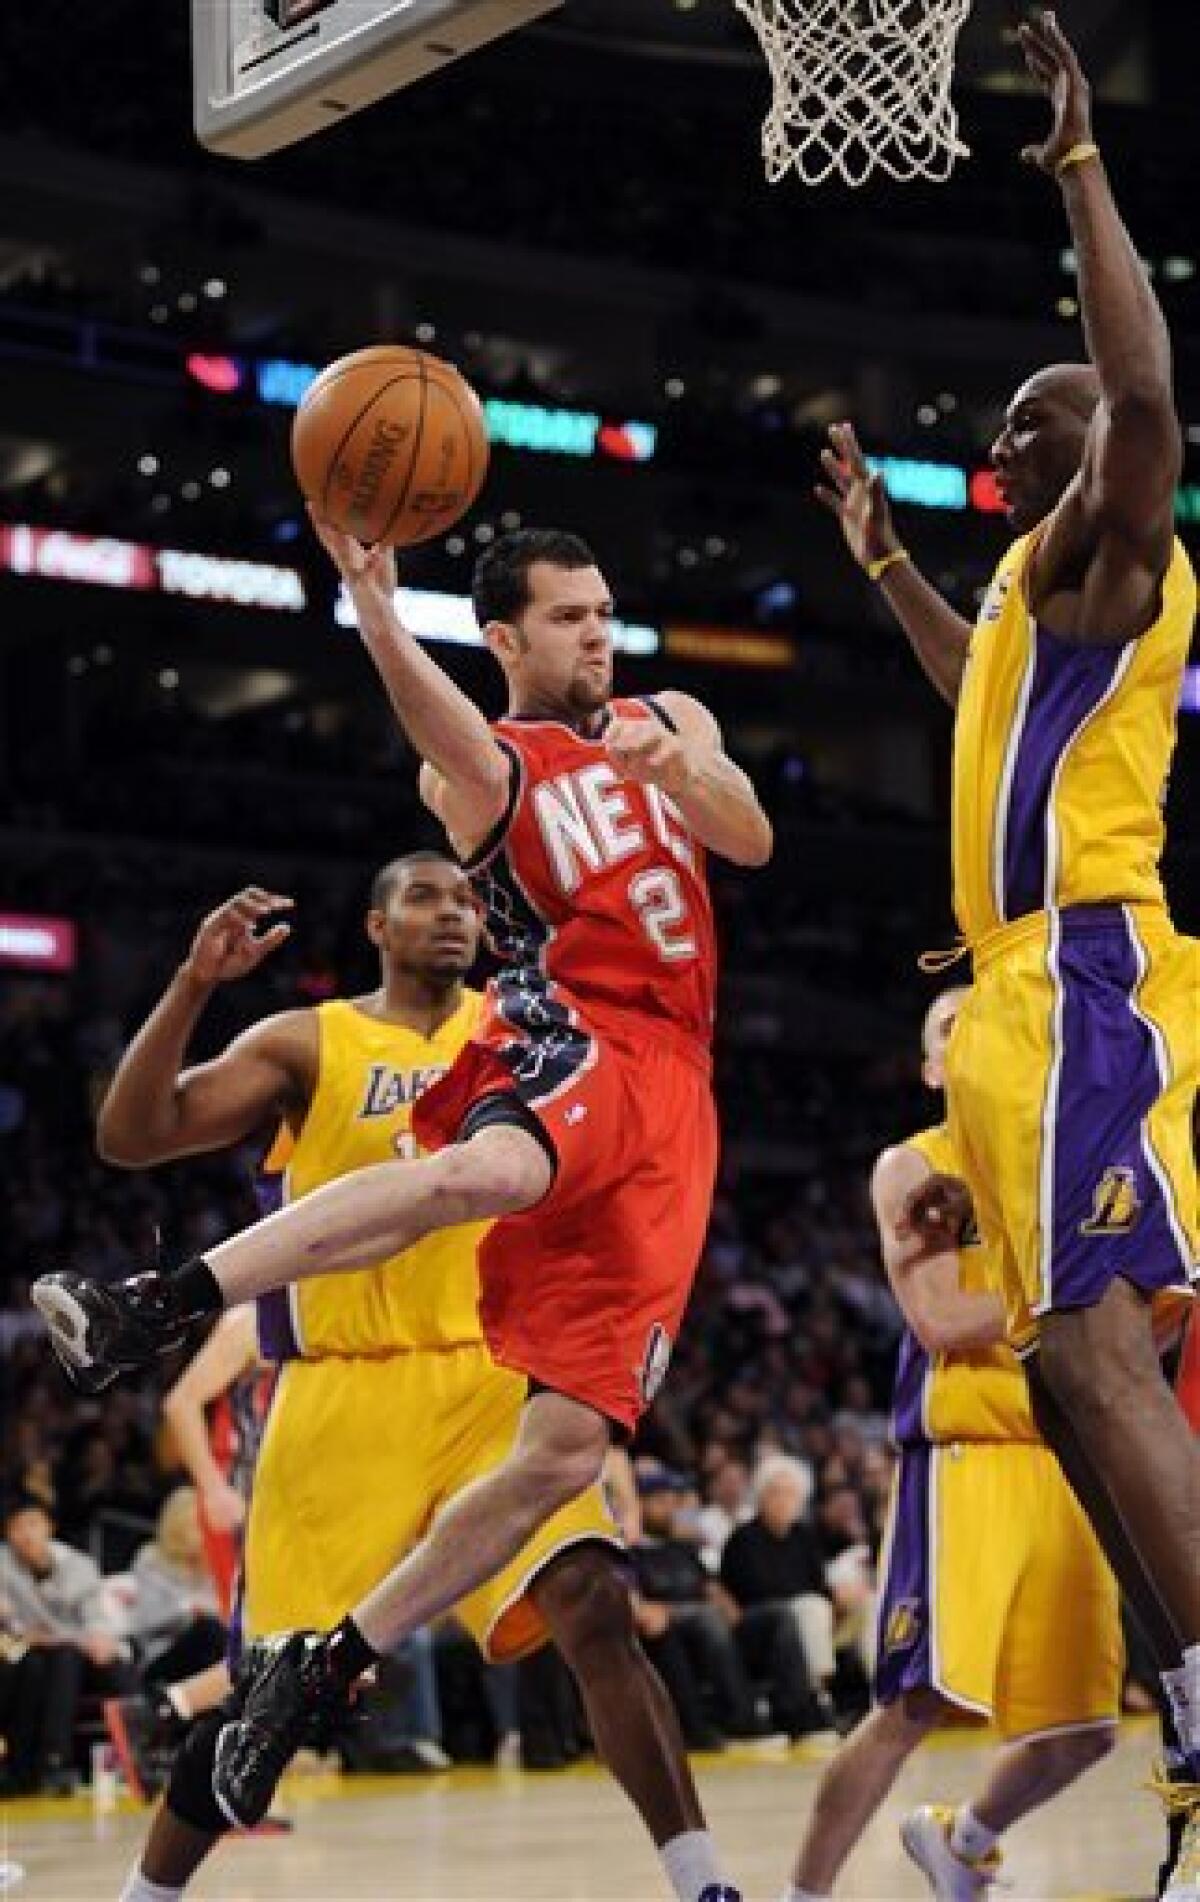 Lakers pull away, top Nets as best beats worst - The San Diego Union-Tribune